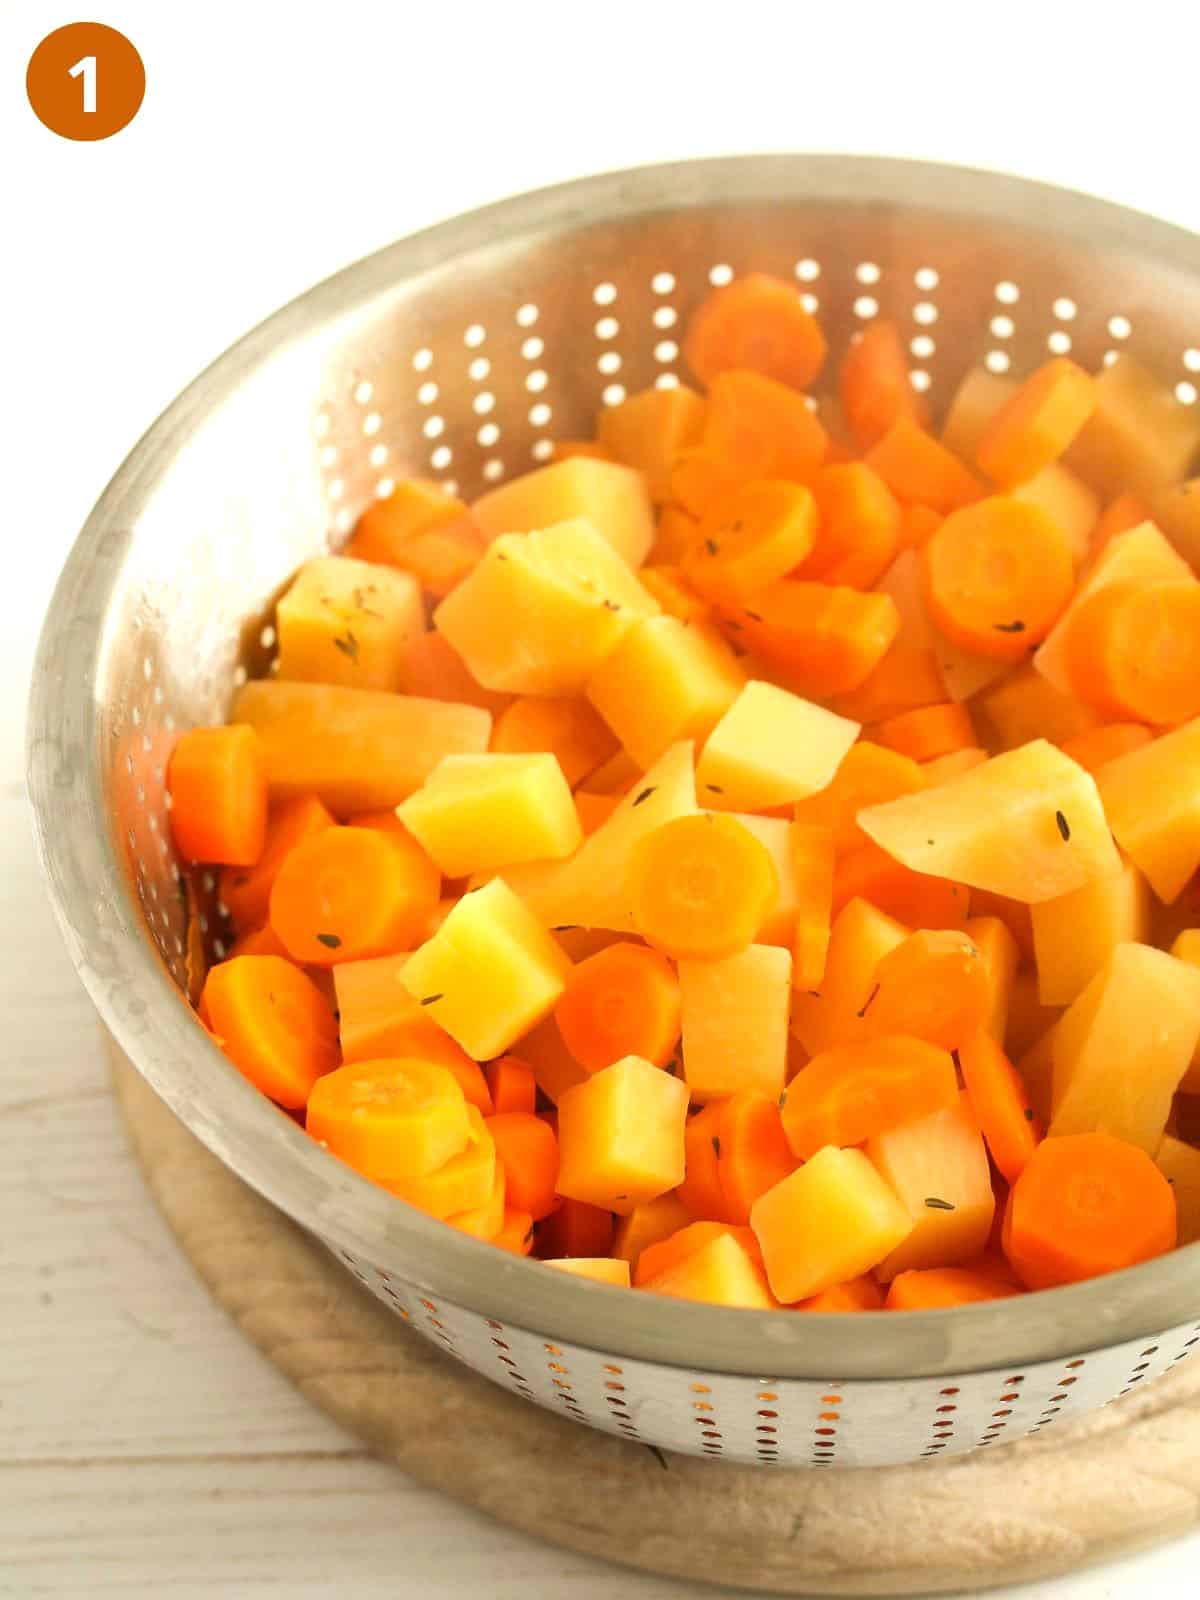 draining rutabaga and carrots in a colander.